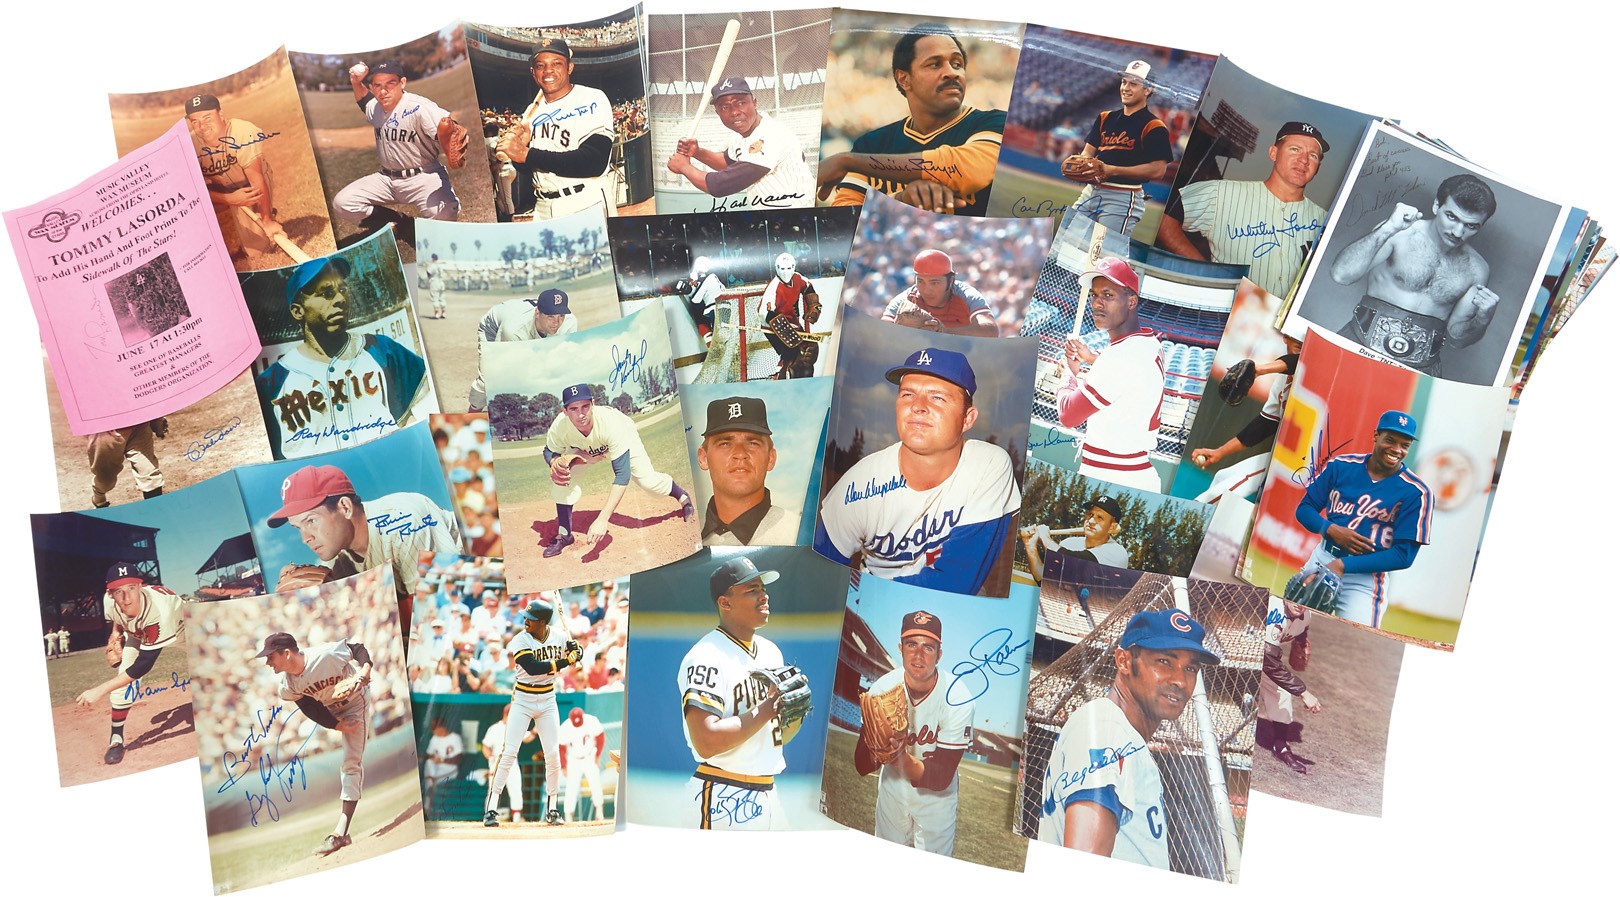 Baseball In-Person Signed Photo Collection w/Koufax and Drysdale (65)